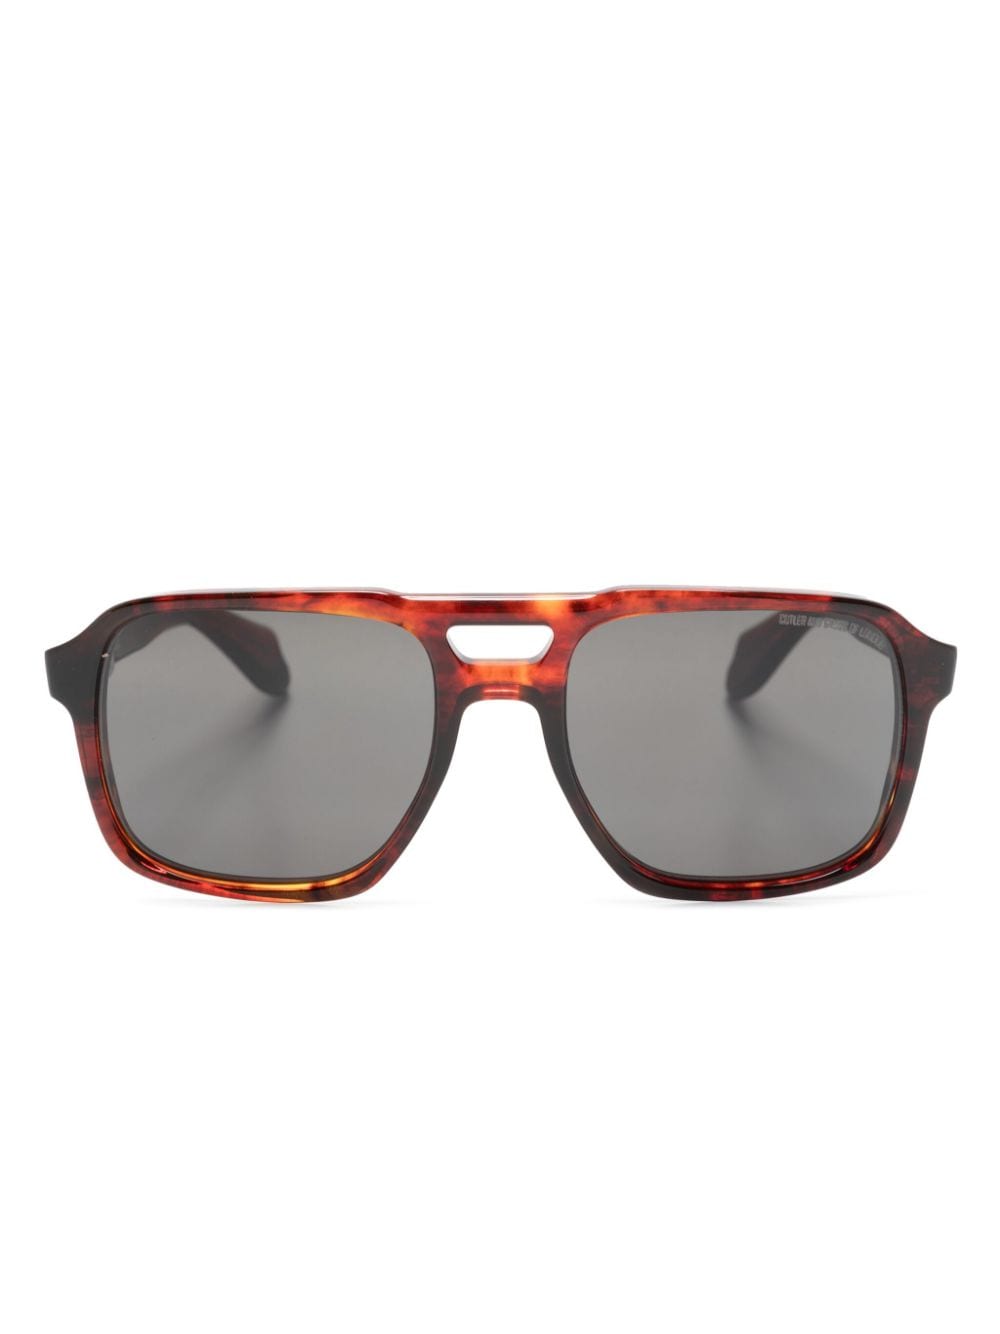 Cutler And Gross 1394 Pilot-frame Sunglasses In Red